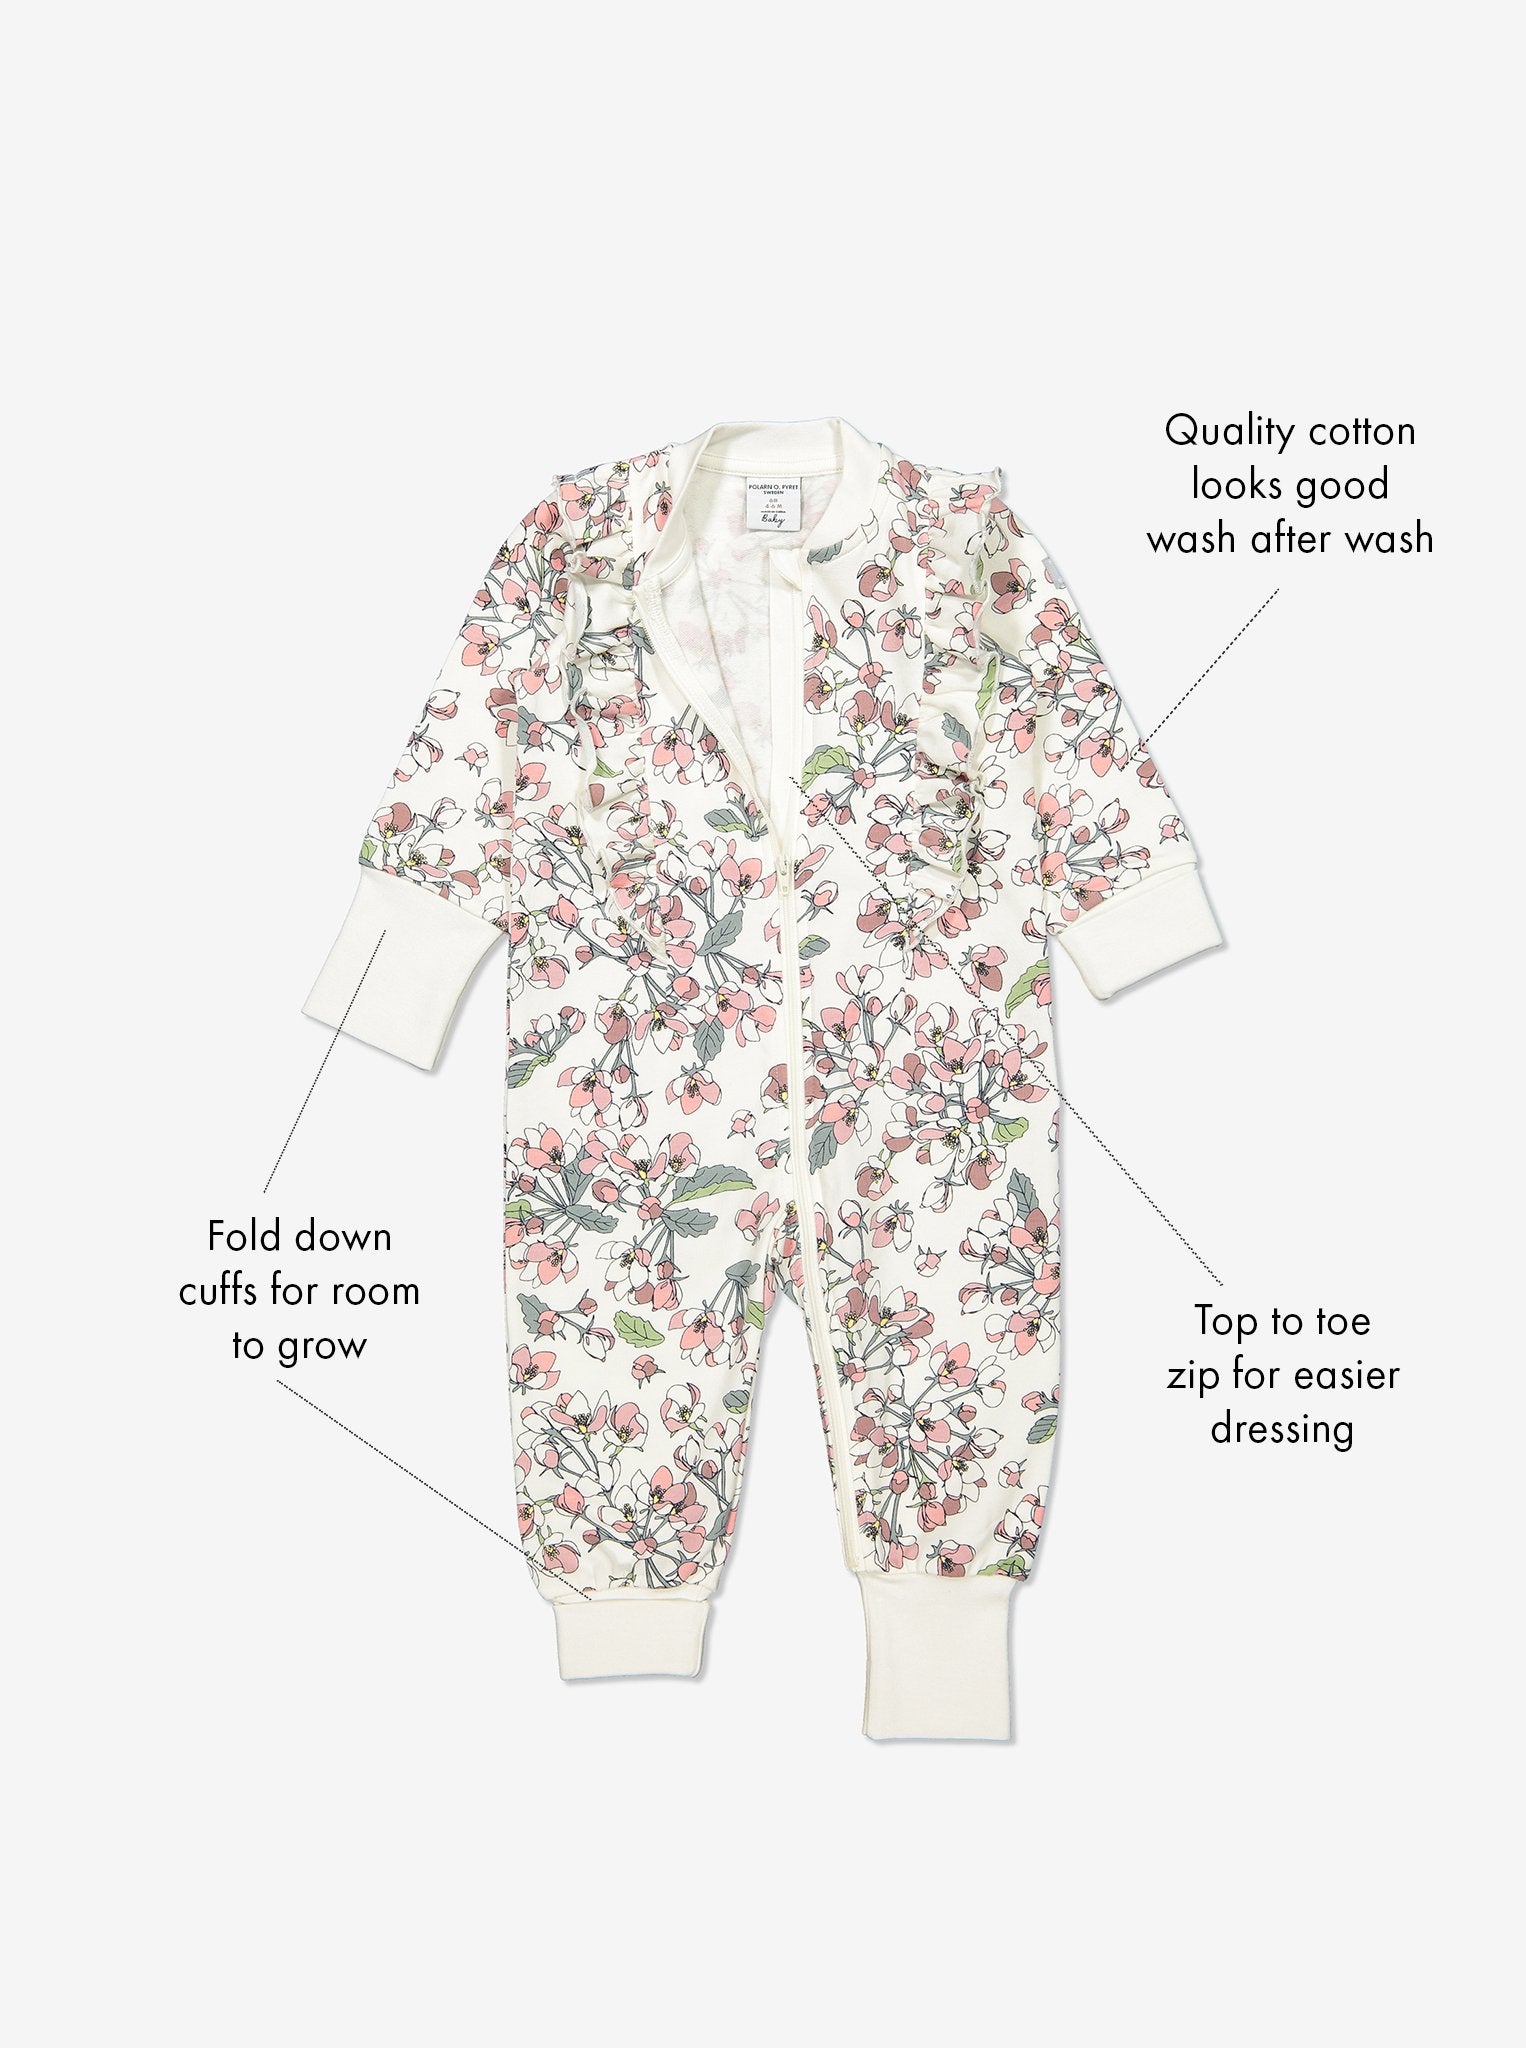 Floral Print Baby All-in-one